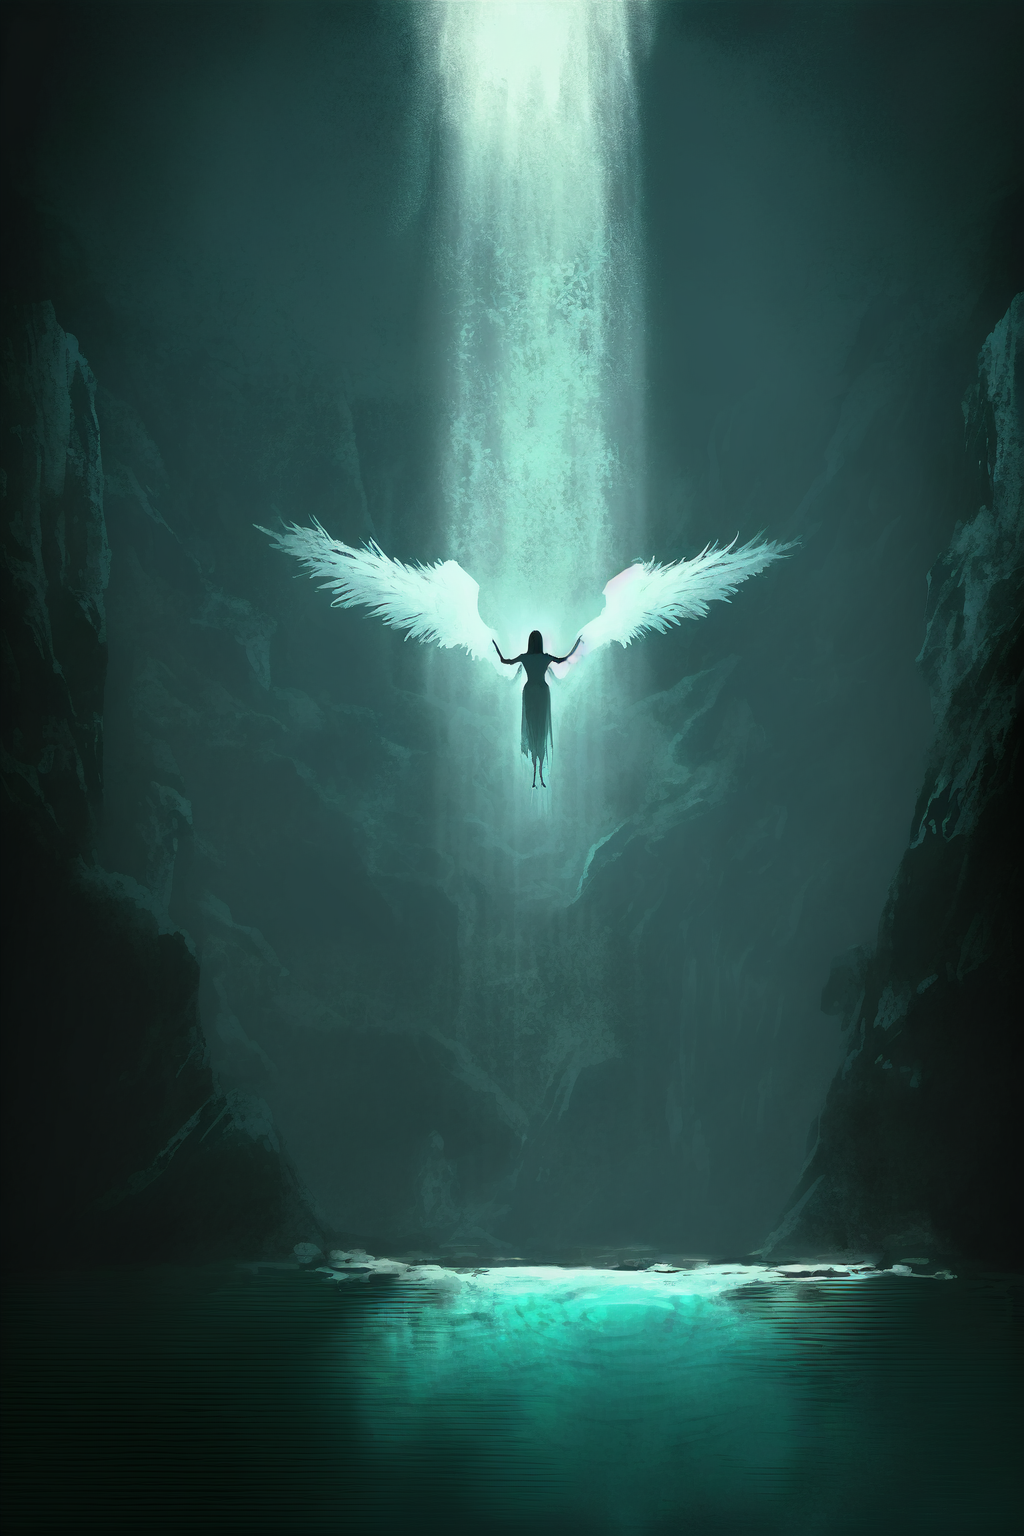 Ninijourney levitating angel in a cave